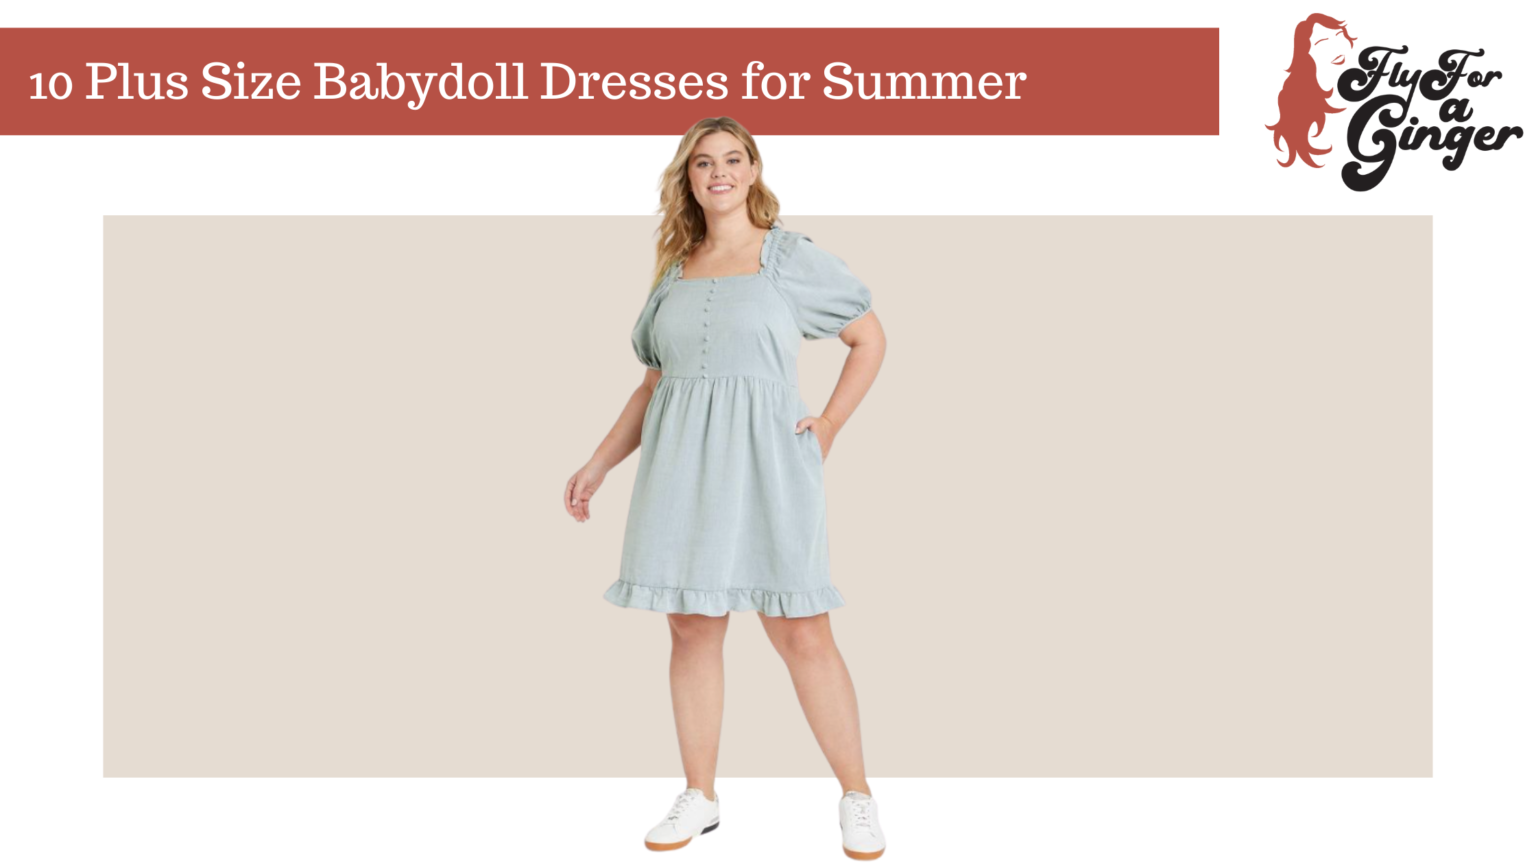 10 Plus Size Babydoll Dresses for Summer